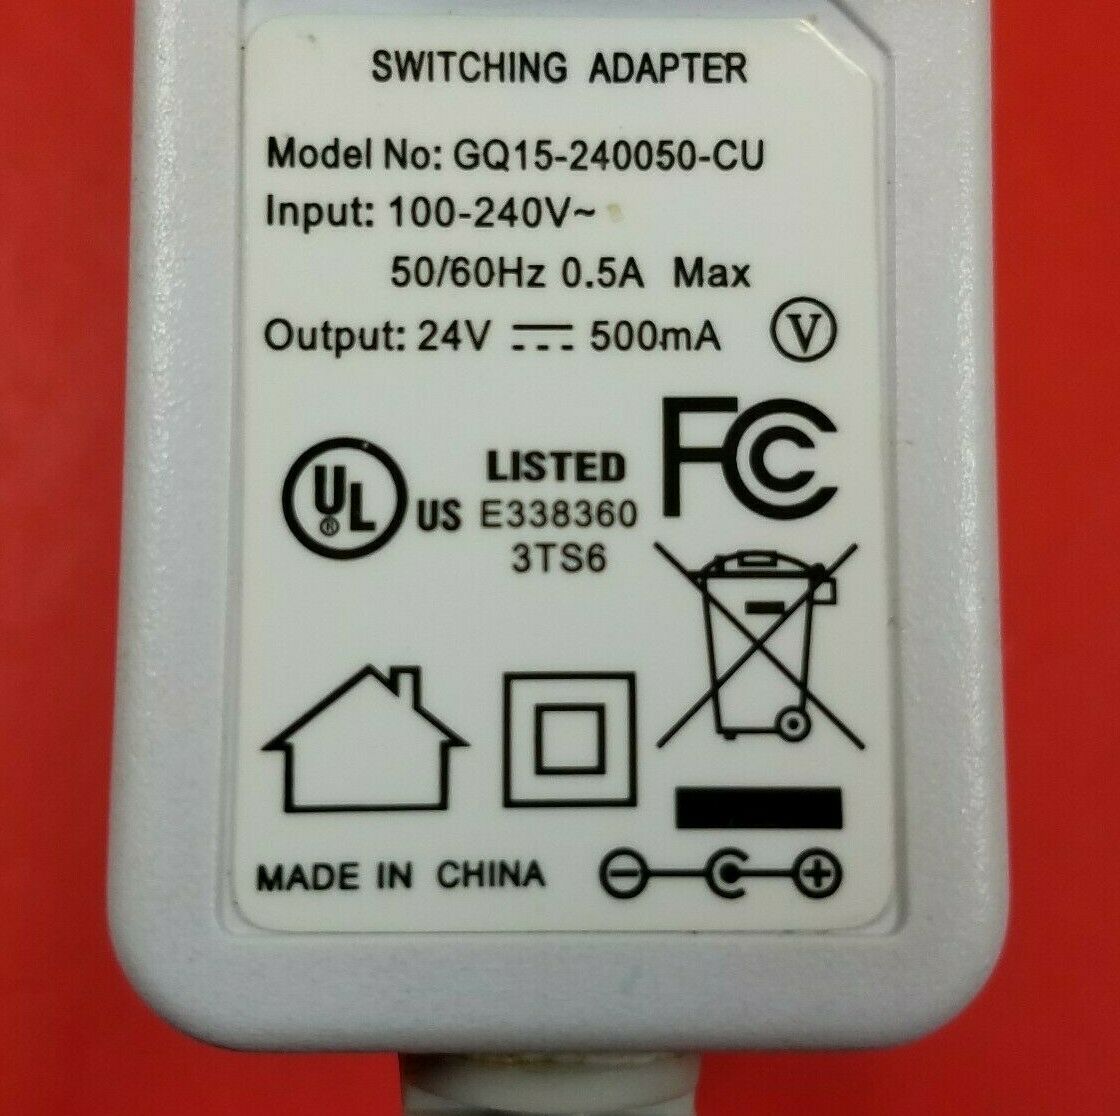 Switching Adaptor GQ15-240050-CU Power Supply 24V - 500mA AC/DC Adapter Charger Type: AC/DC Adapter Features: new MP